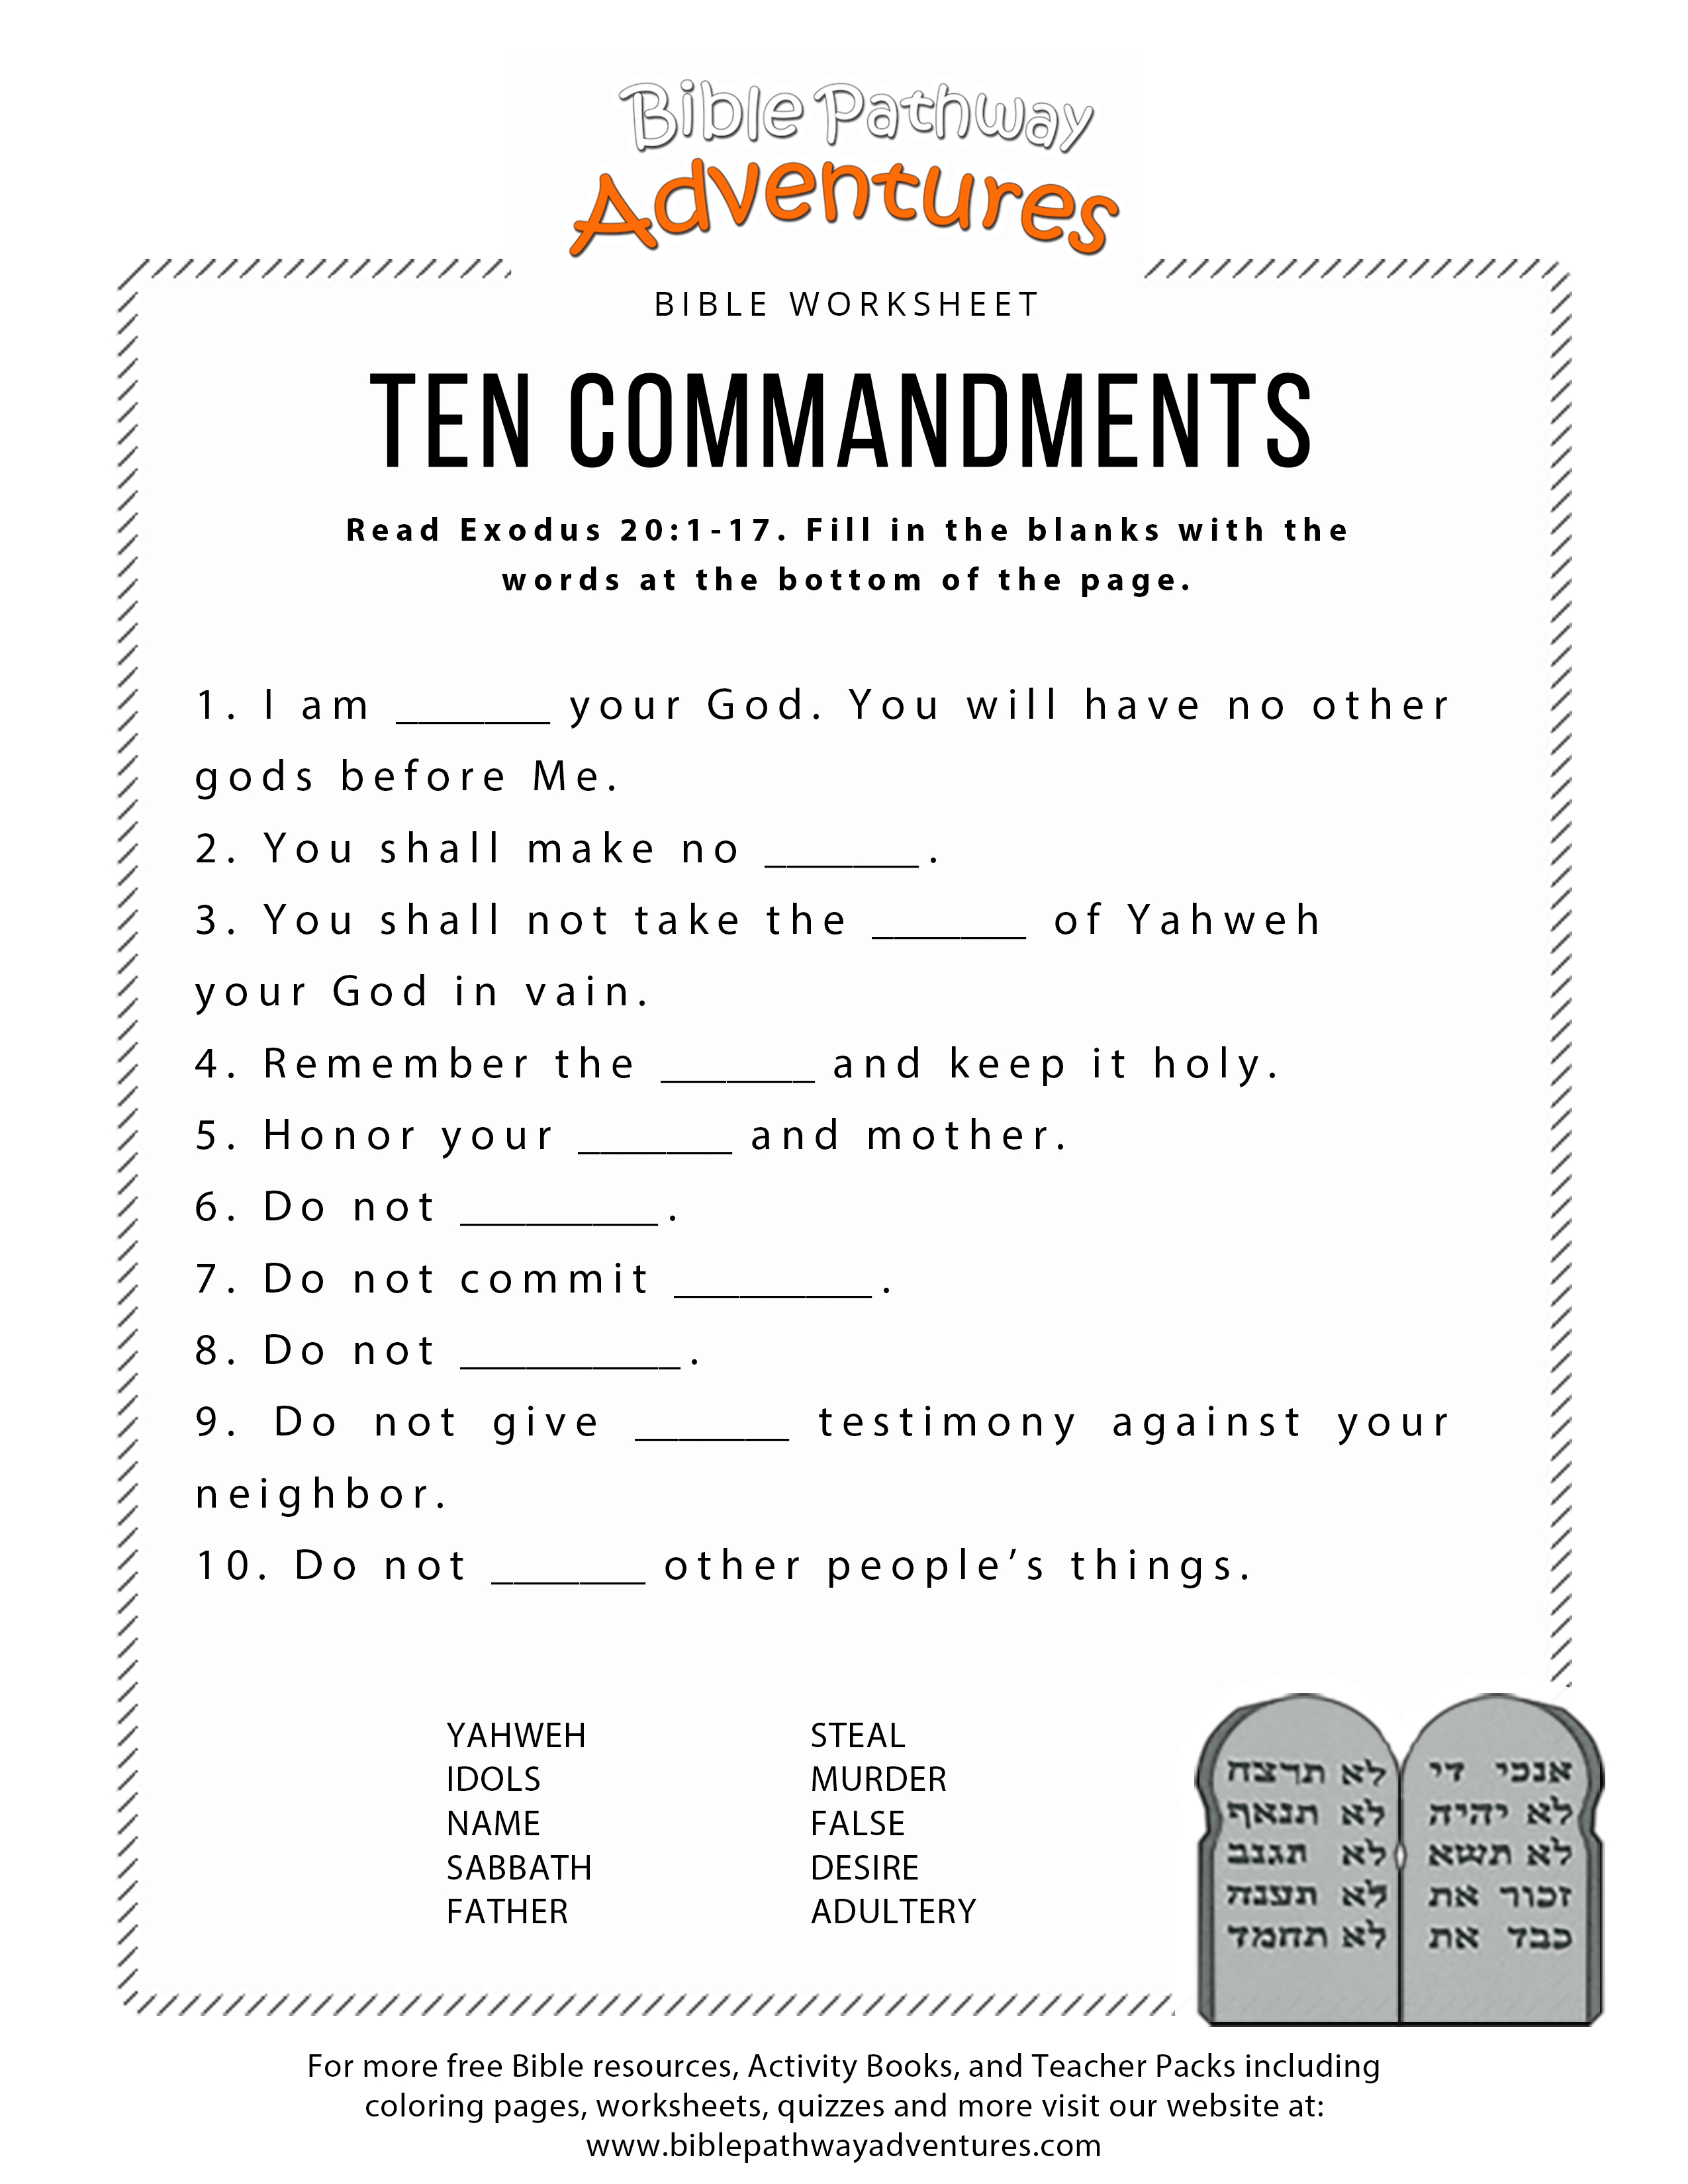 Ten Commandments Worksheet For Kids | Worksheets For Psr | Bible - Free Printable Youth Bible Study Lessons